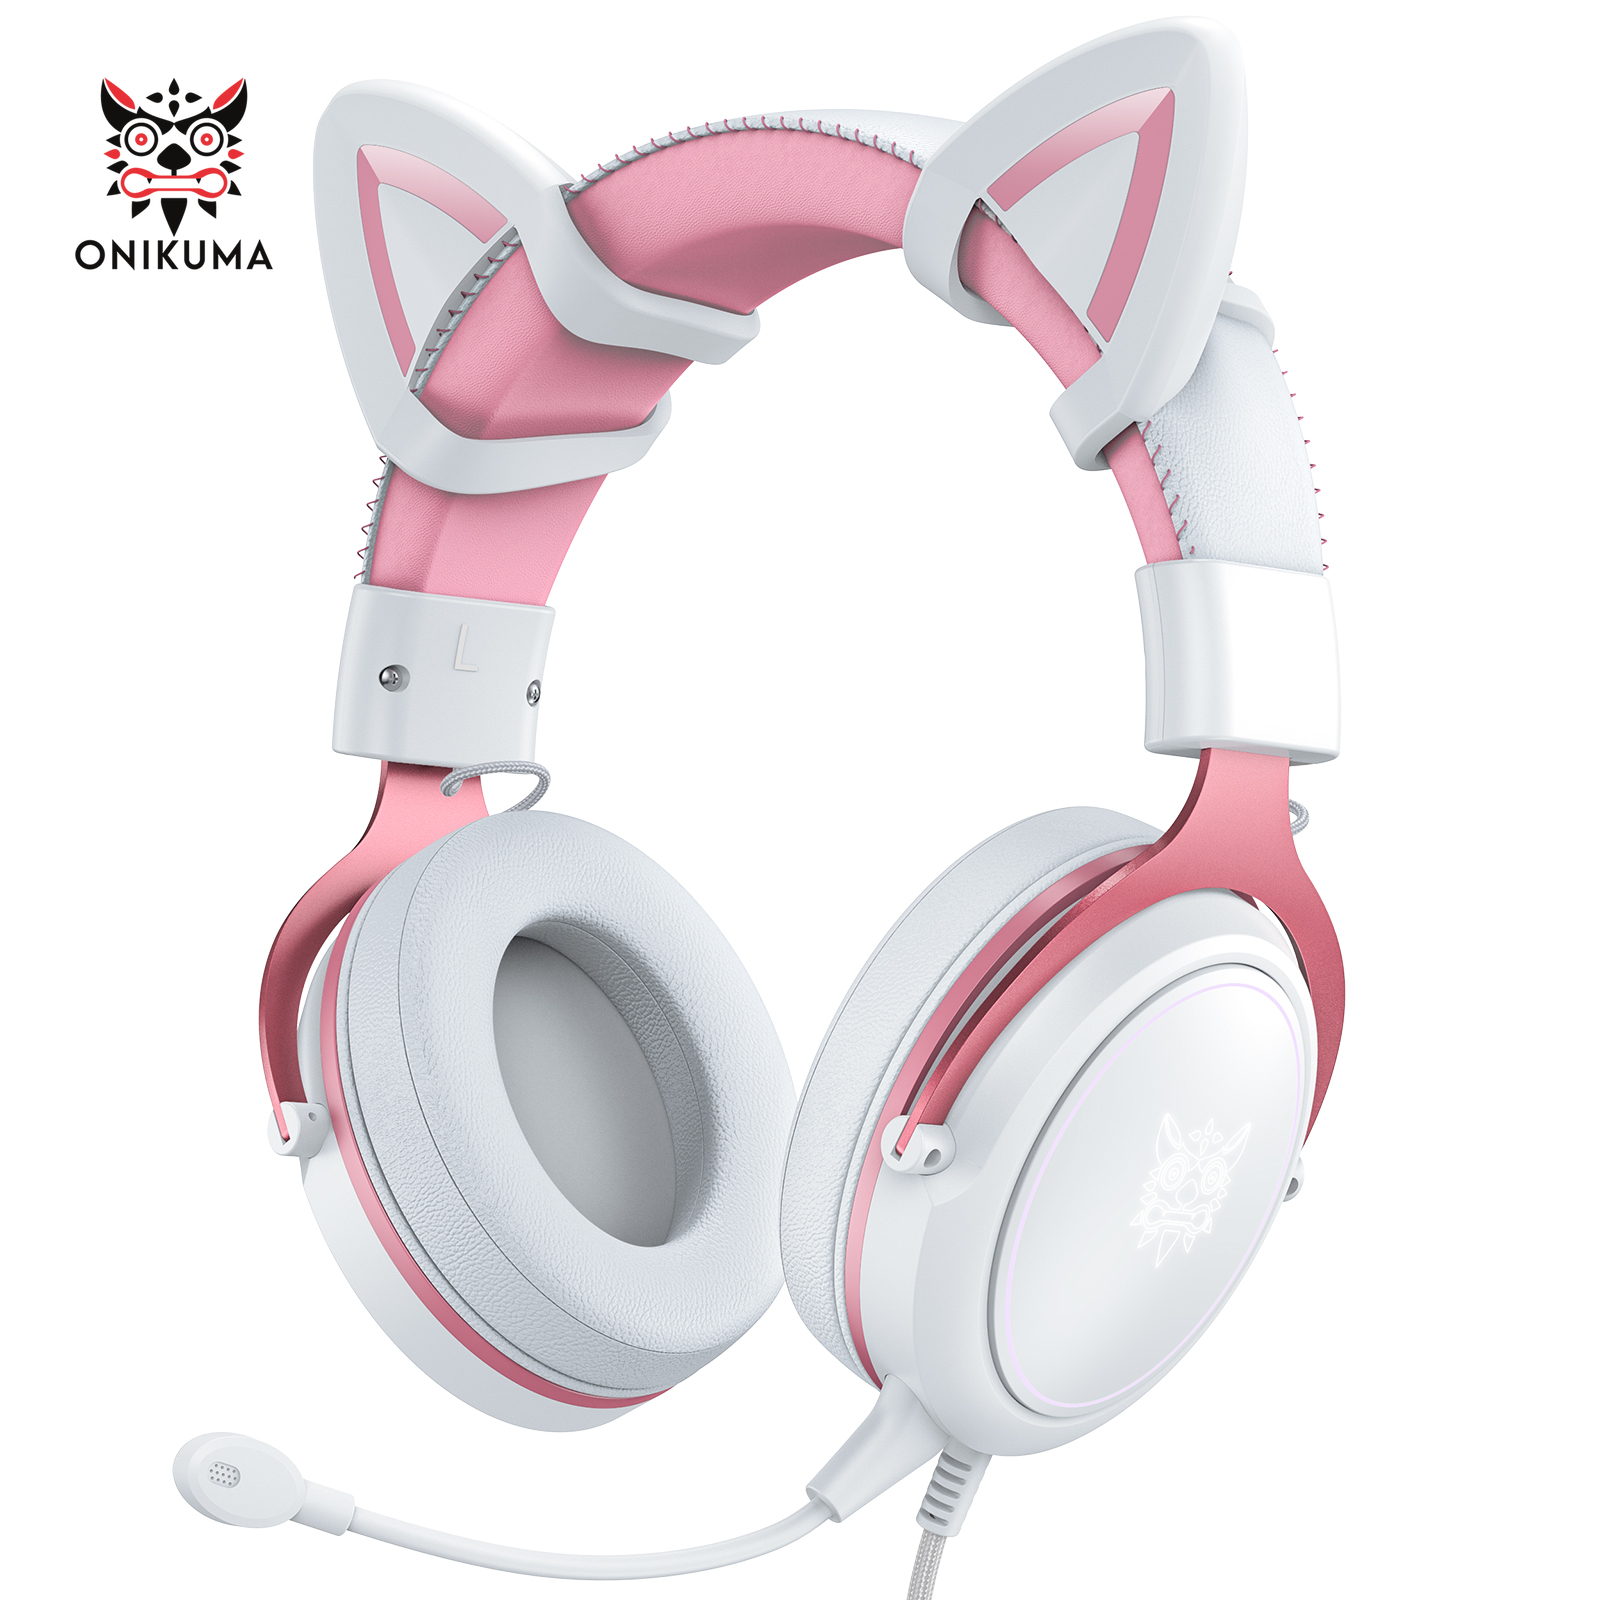 New ONIKUMA X10 Gaming Headset with Mic and Noise Cancellation Headphone